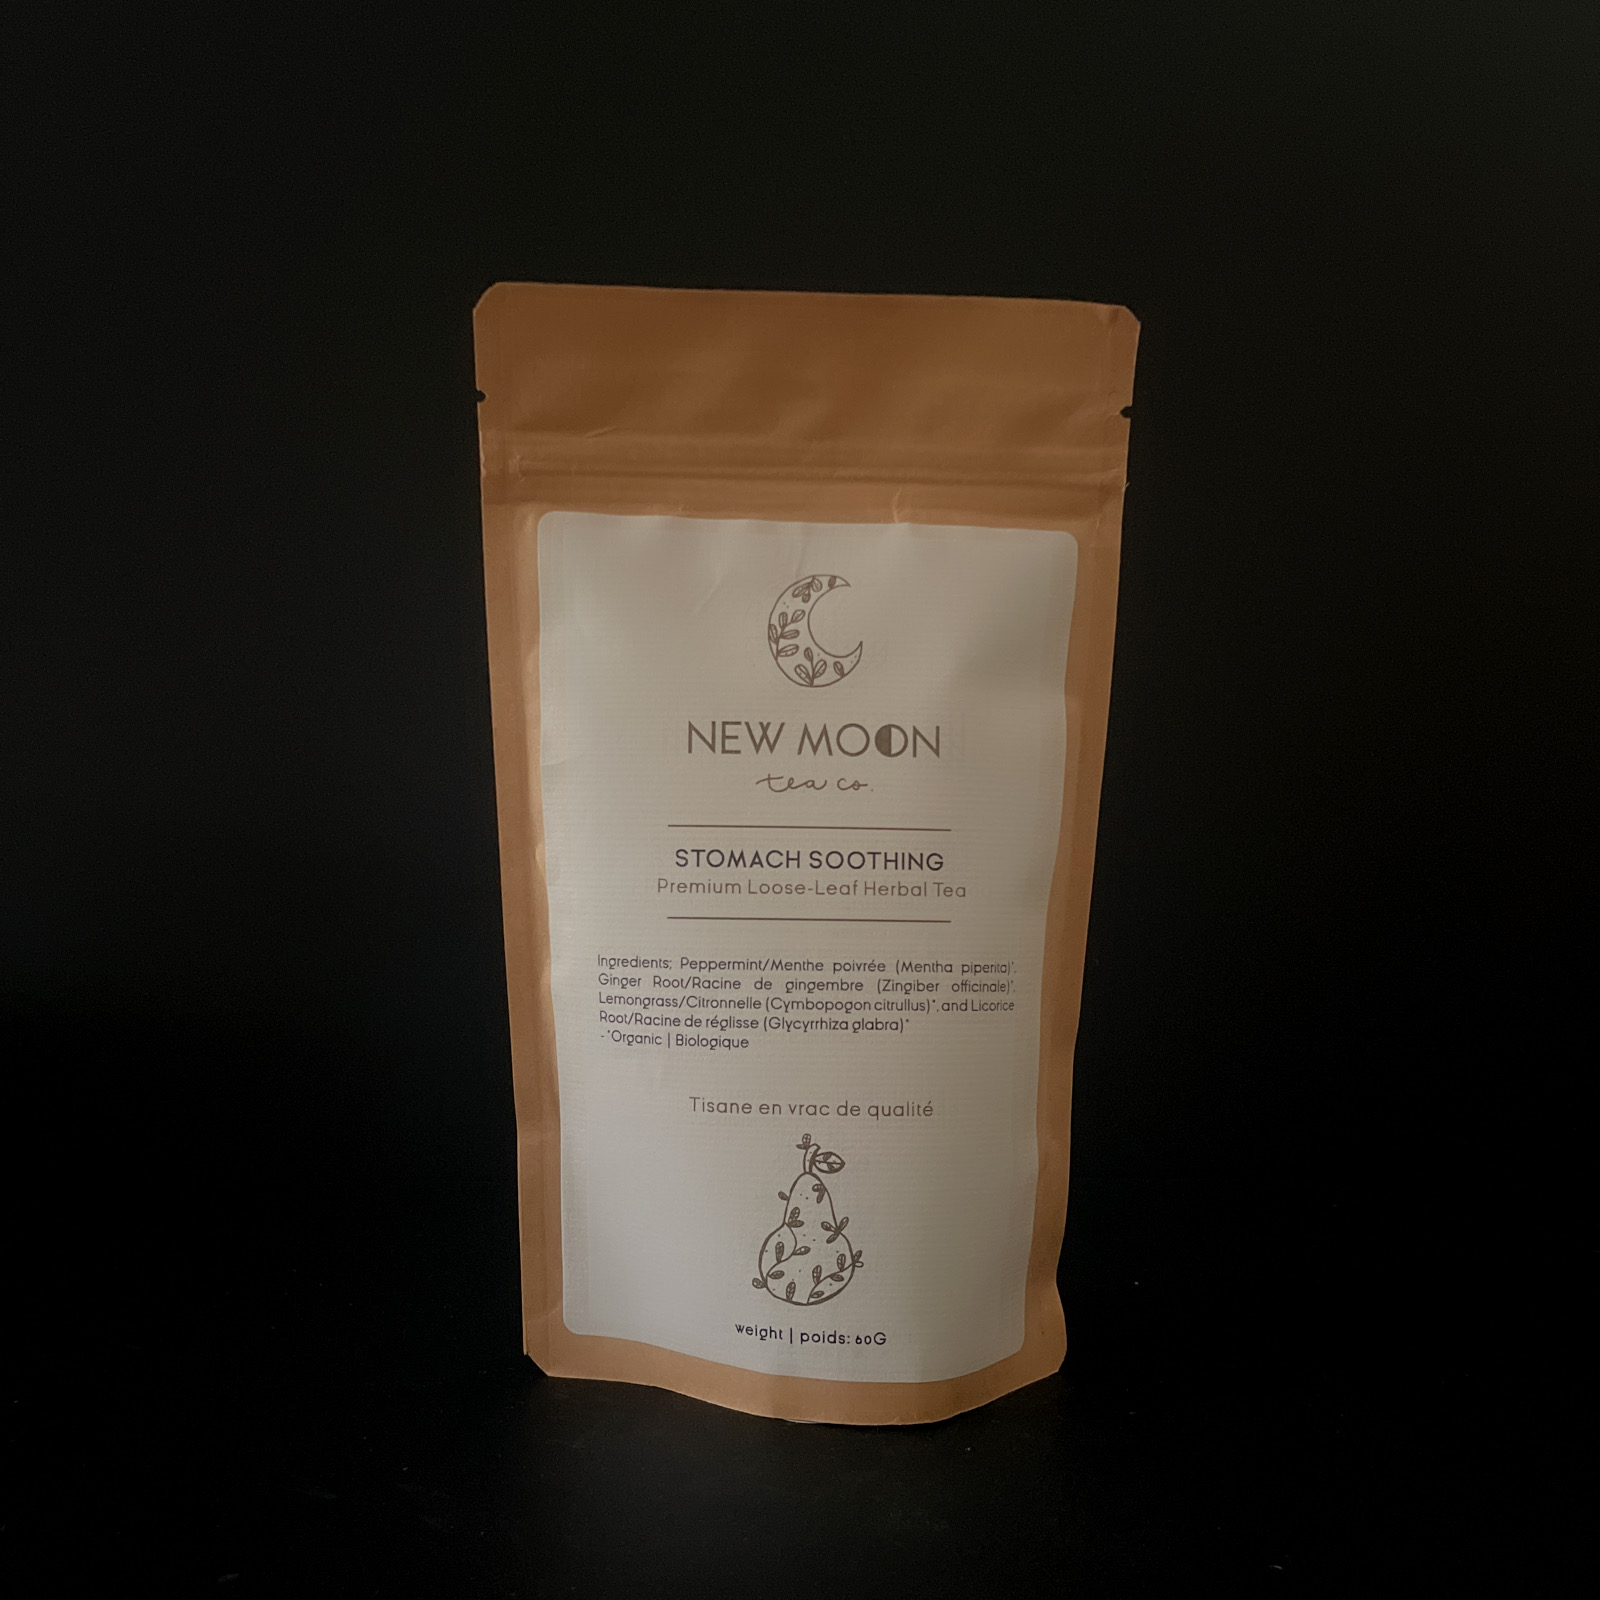 New Moon Tea: Stomach Soothing